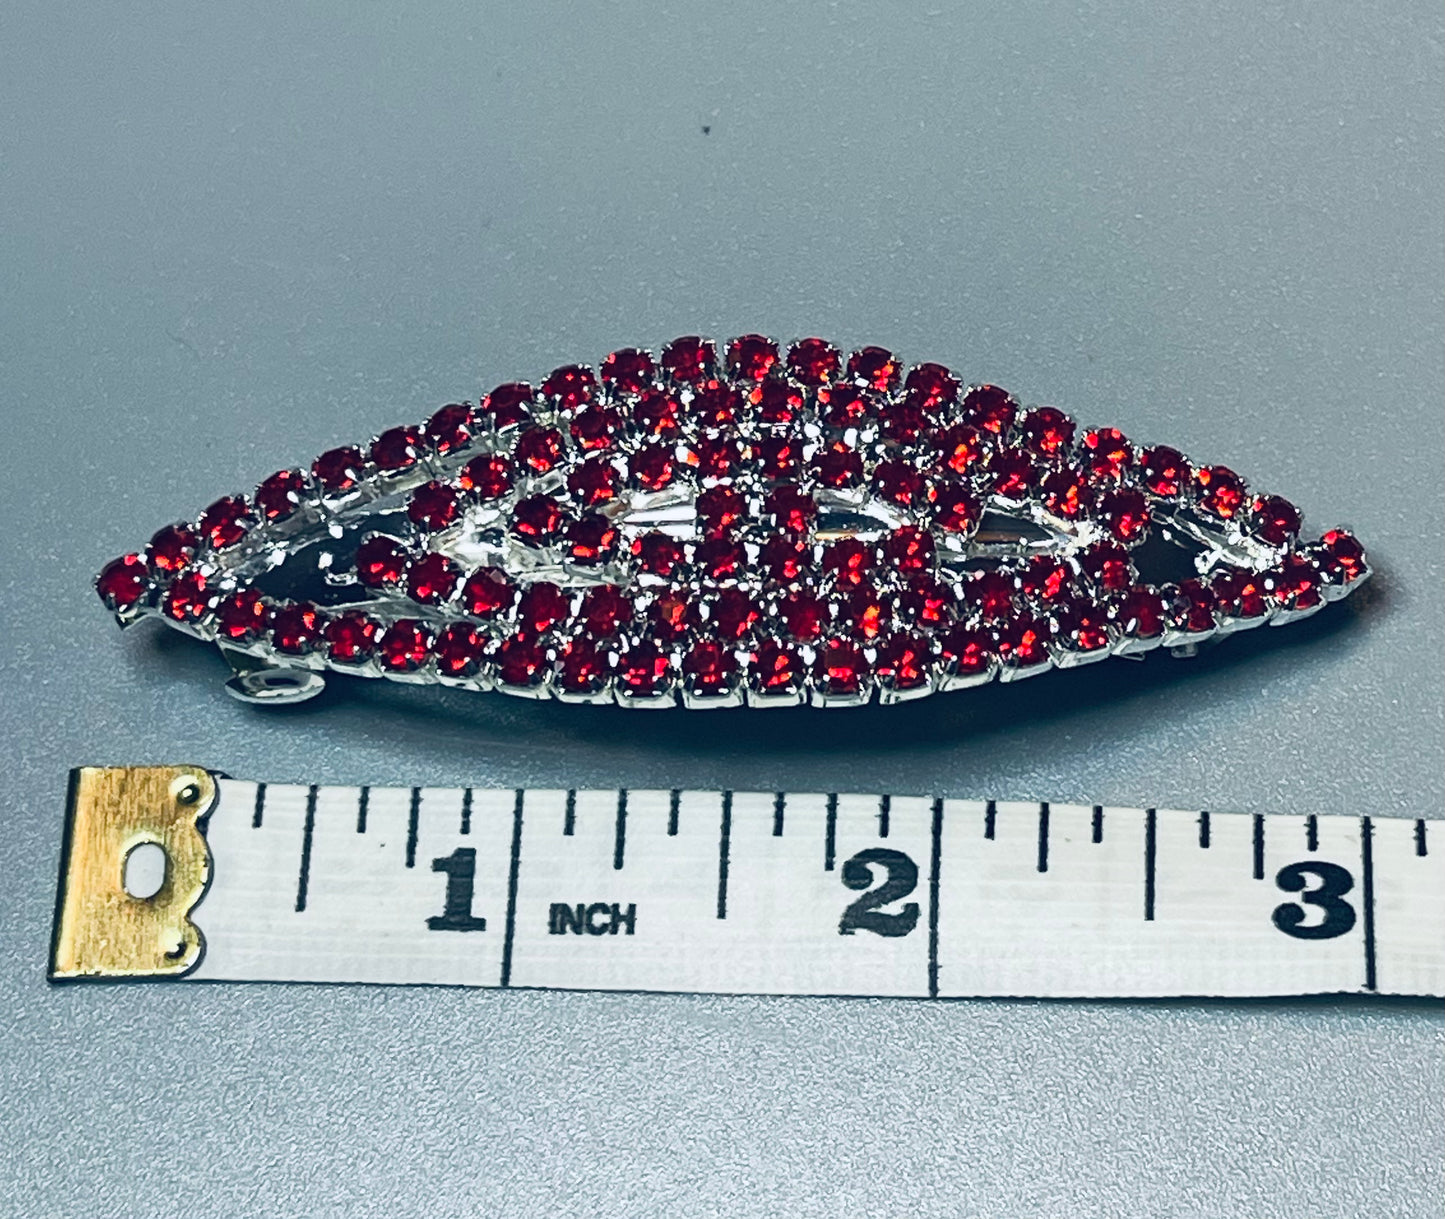 Red Crystal rhinestone barrette approximately 3.0” silver tone formal hair accessories gift wedding bridesmaid Prom birthday gifts